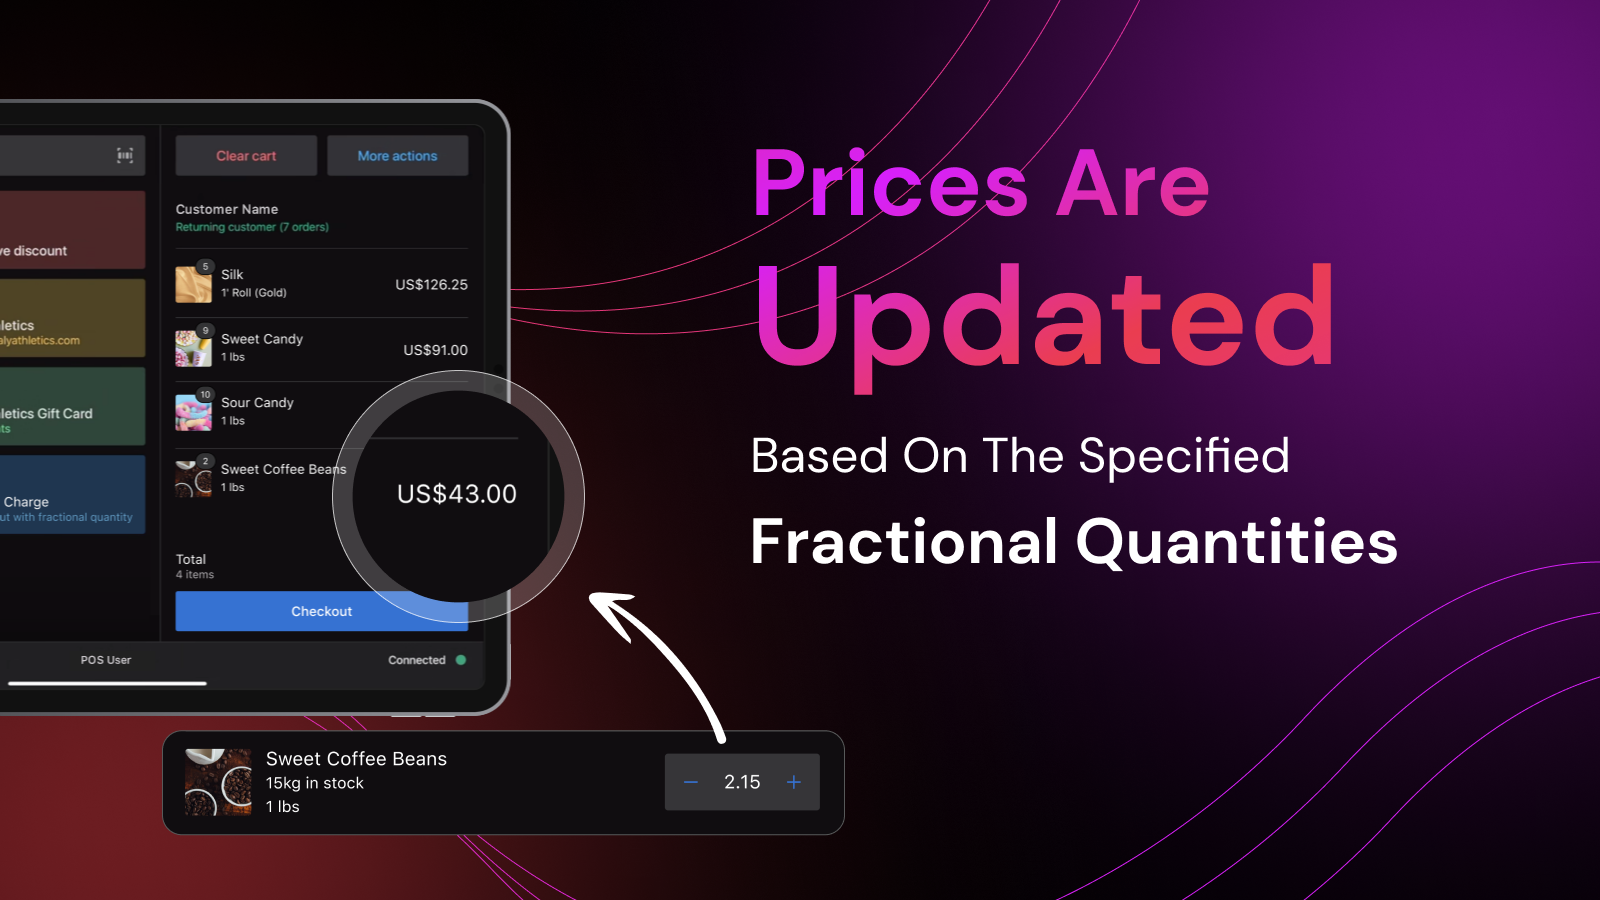 Prices are updated based on the specified fractional quantities